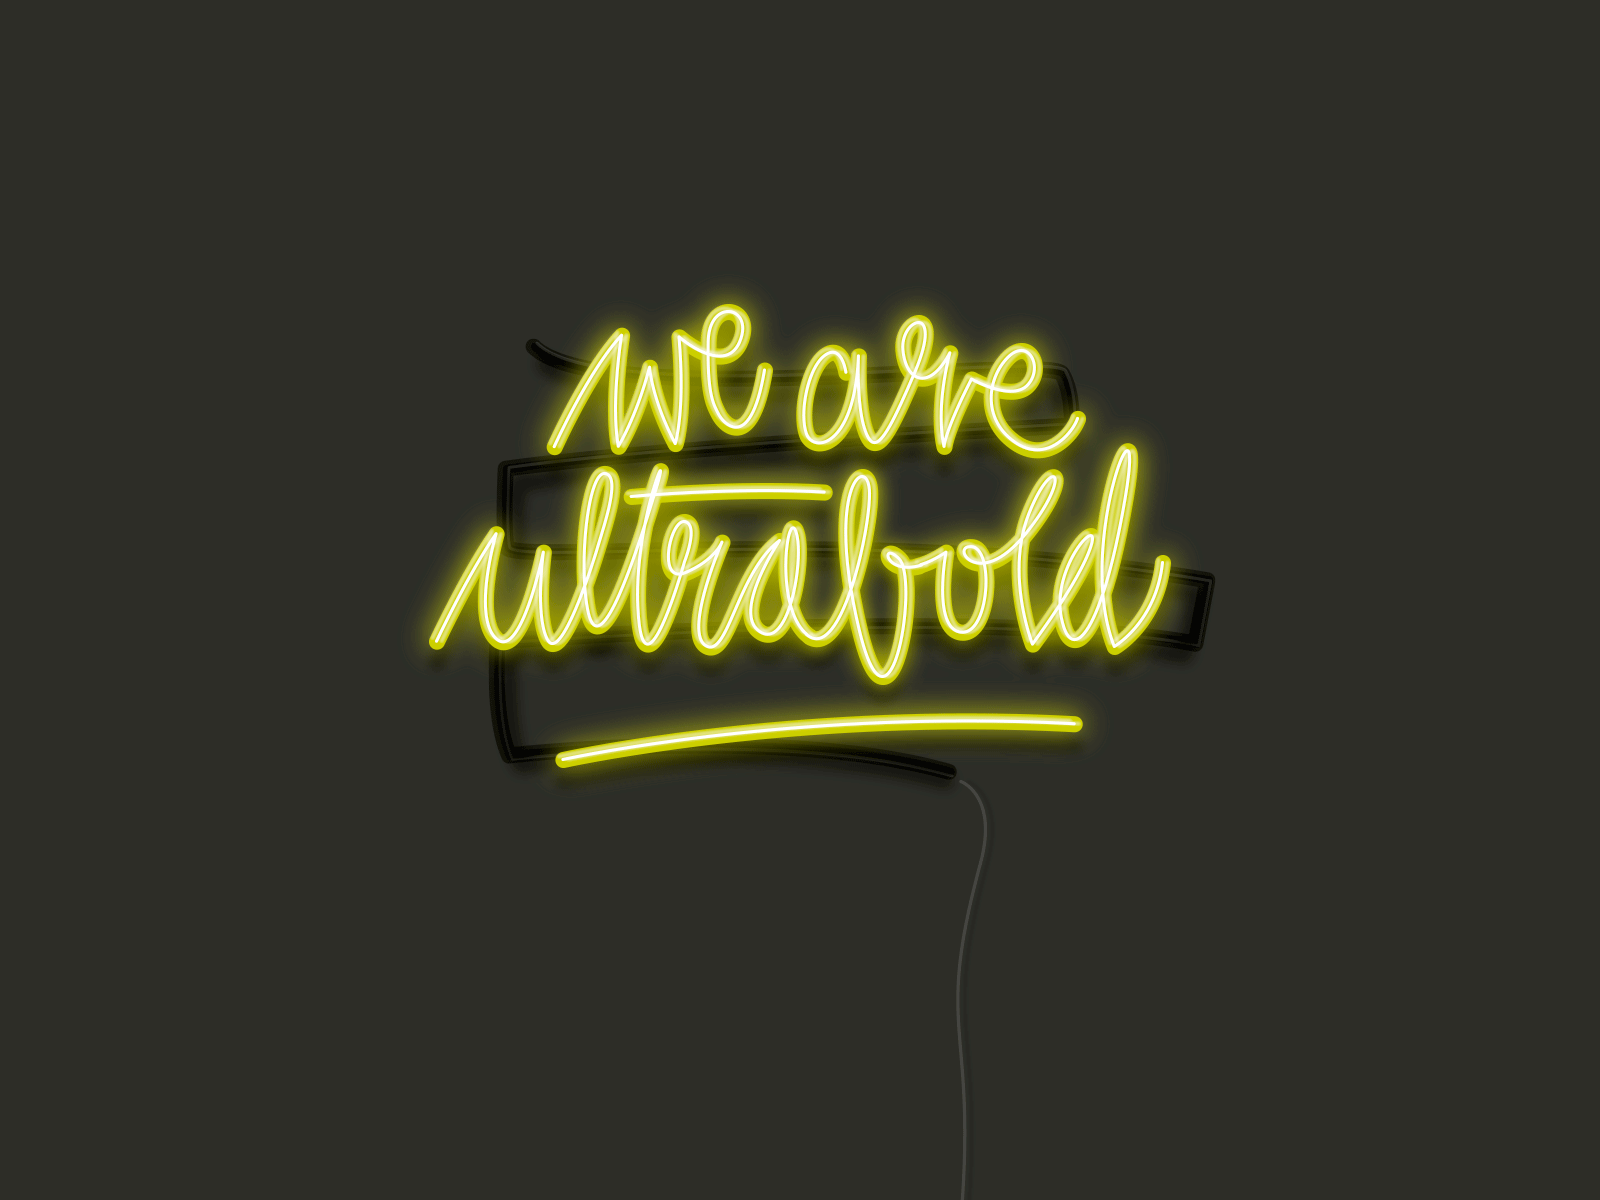 We are ultra(b)old agency animation blink calligraphy dark design gif handmade illustration lettering light mannheim neon neon light old typography ultra old ultrabold vector yellow